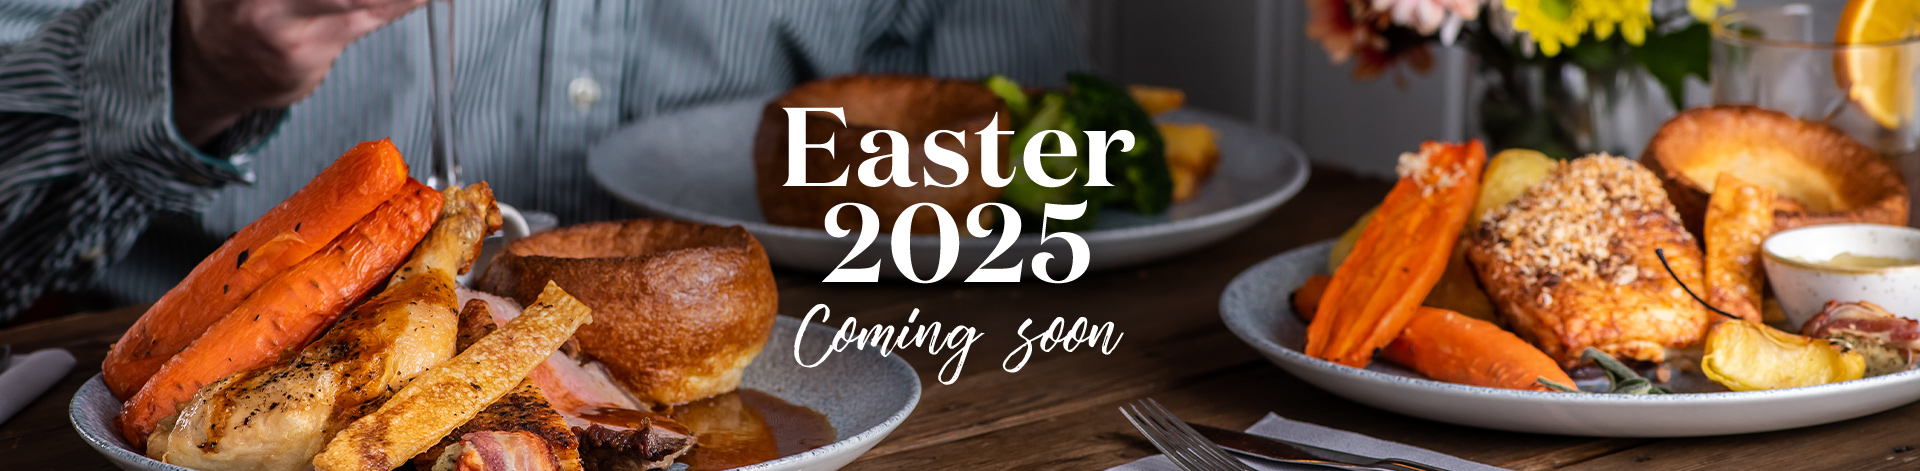 Easter at The Crooked Chimney in Welwyn Garden City